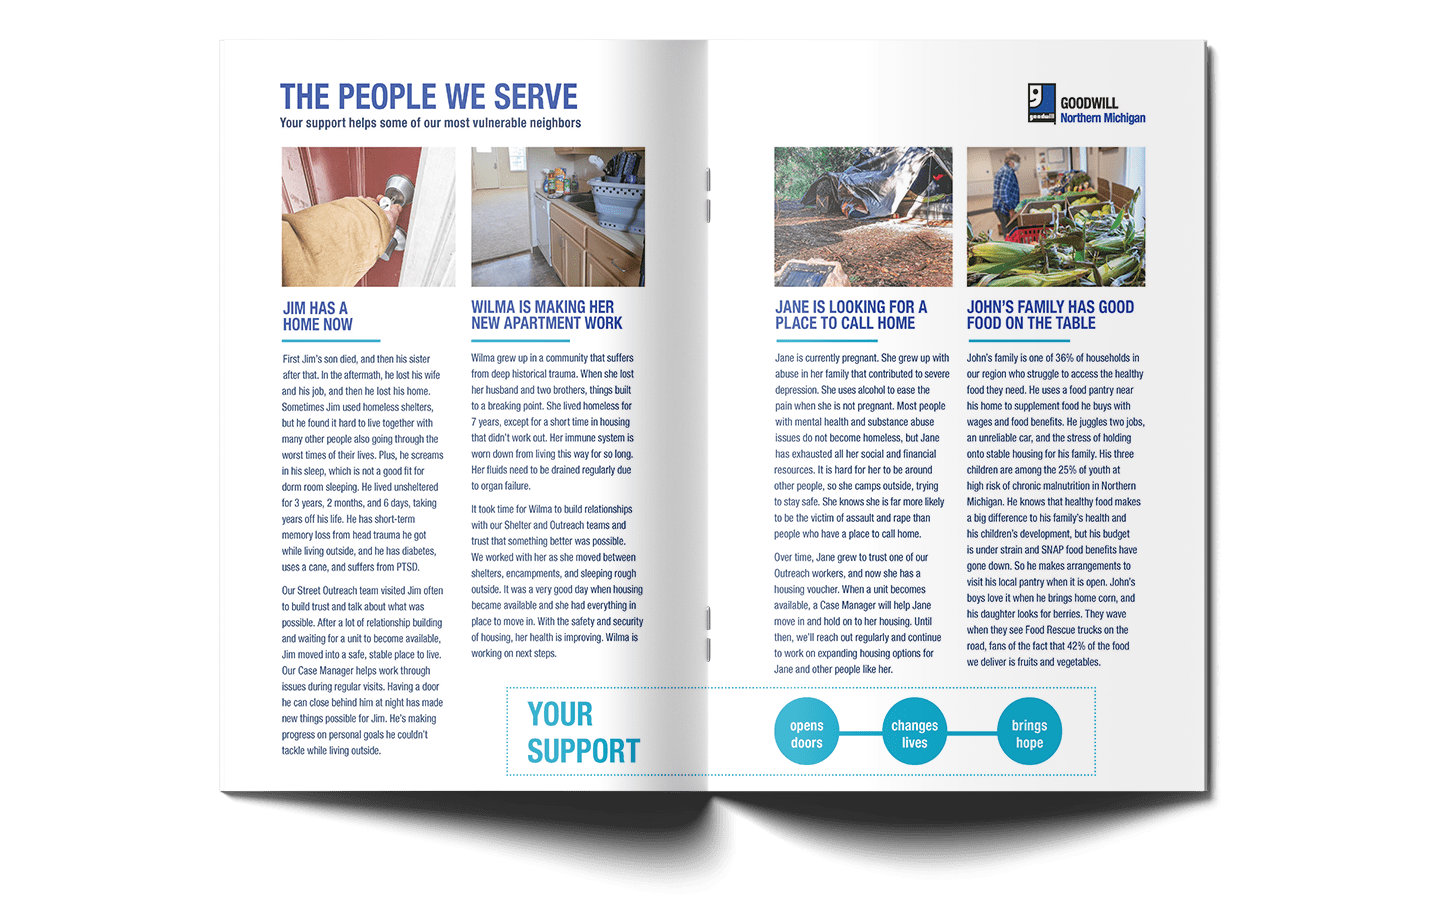 Spread from the annual report showing stories from neighbors in need